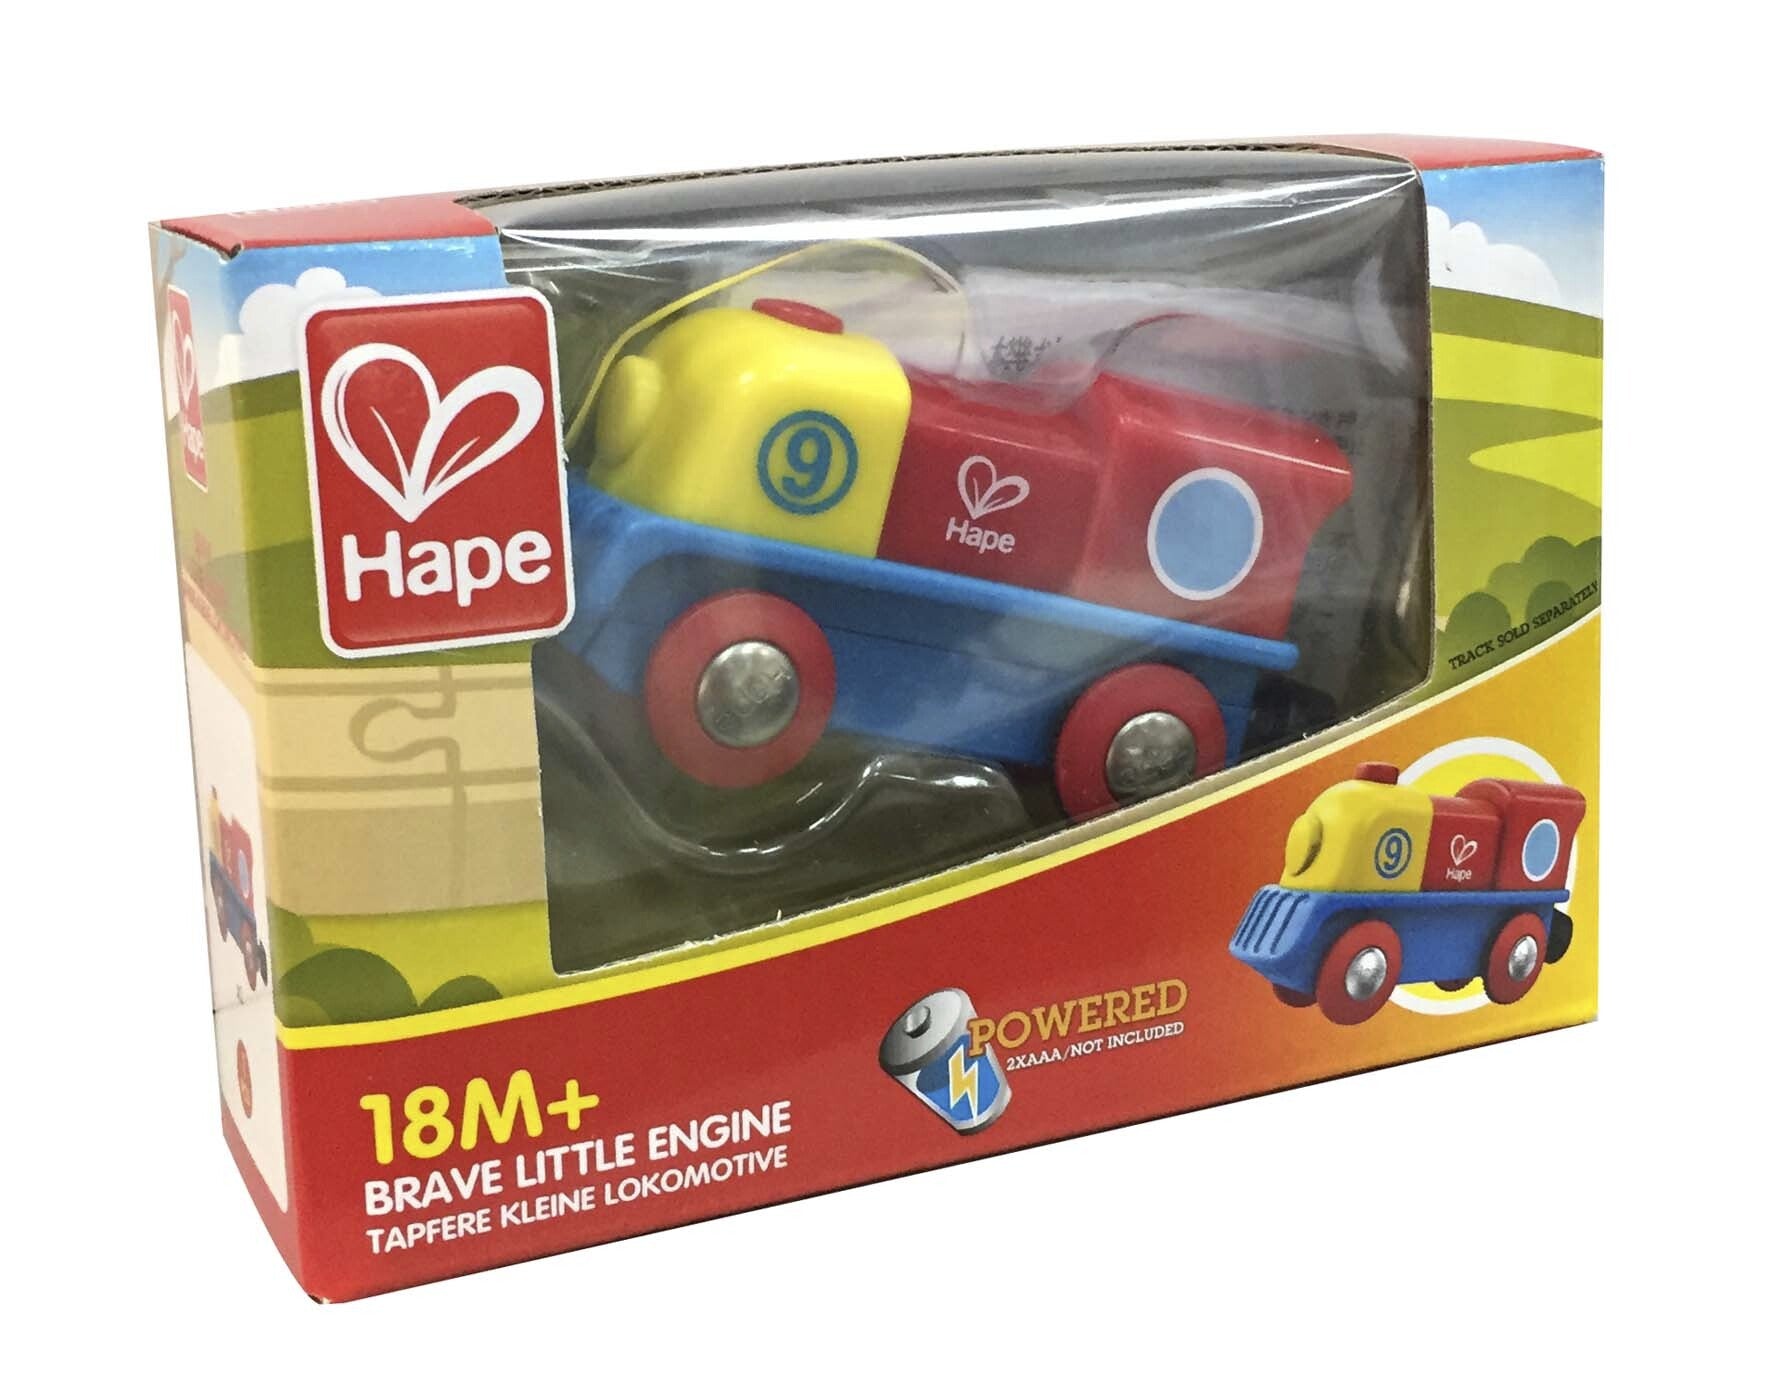 This colorful magnetic engine has a powerful battery operated motor that helps it to climb hills and ramps. The on/off button on top can be easily operated by little fingers. Train measures at 3.6 centimeters wide, 10.2 centimeters long and 5.1 centimeters tall. Engine requires 2 triple A batteries (batteries not included). Item sells for $9.99.